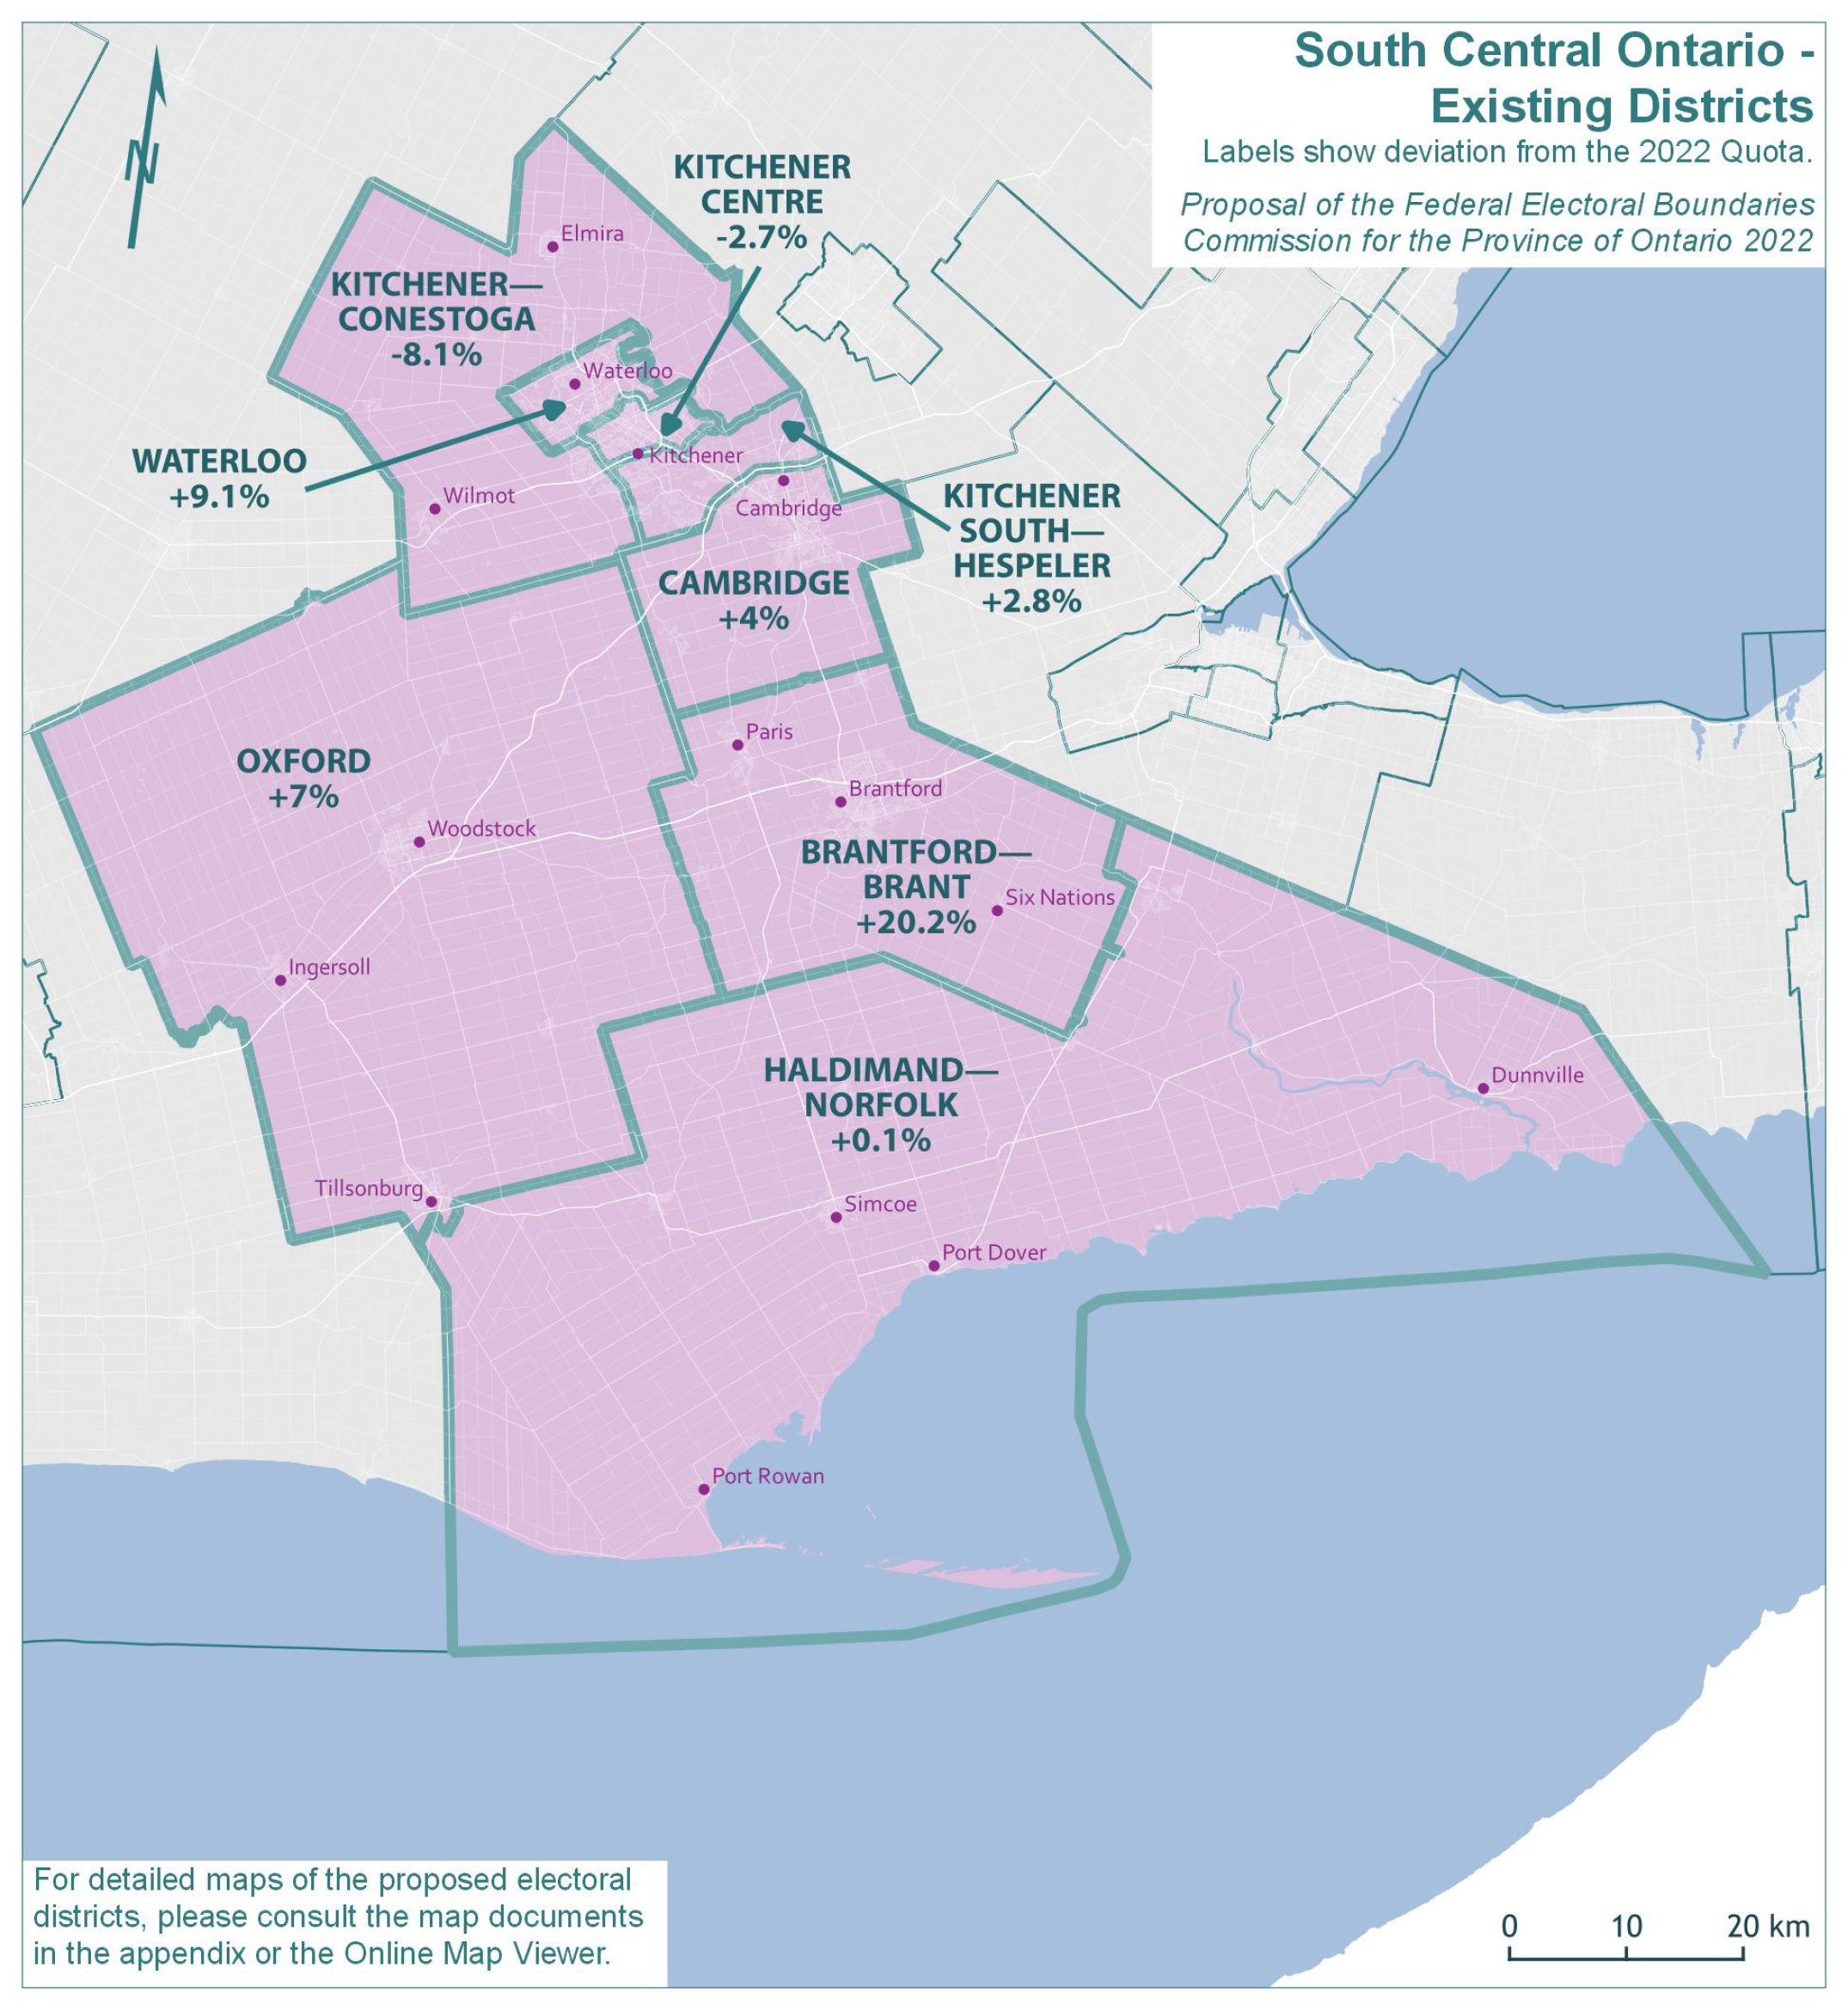 South Central Ontario - Existing Districts